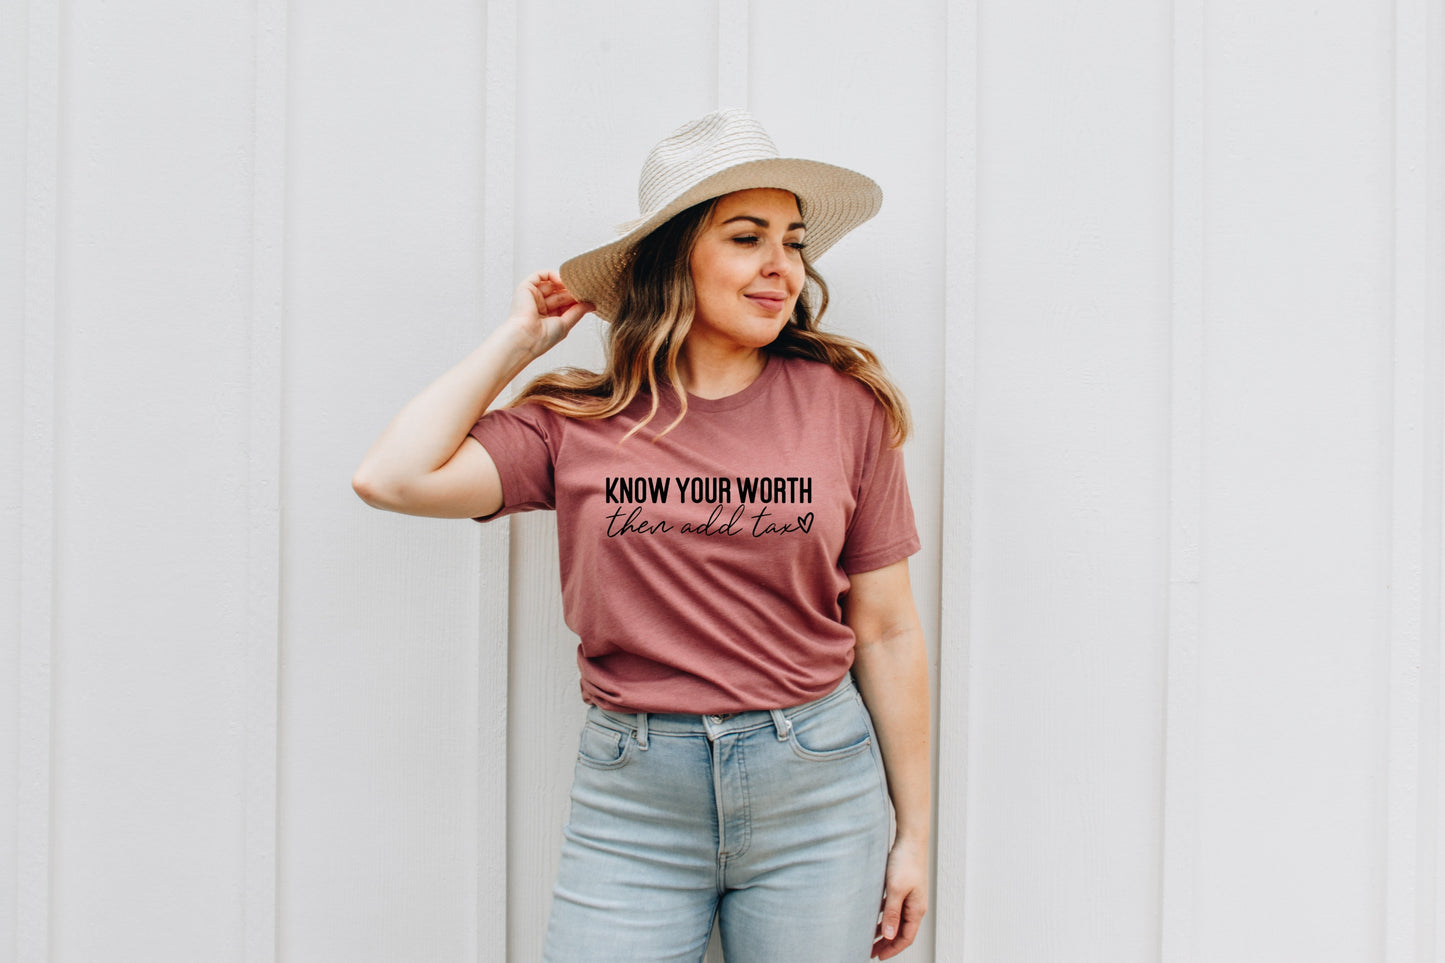 Know Your Worth Then Add Tax Unisex Tee